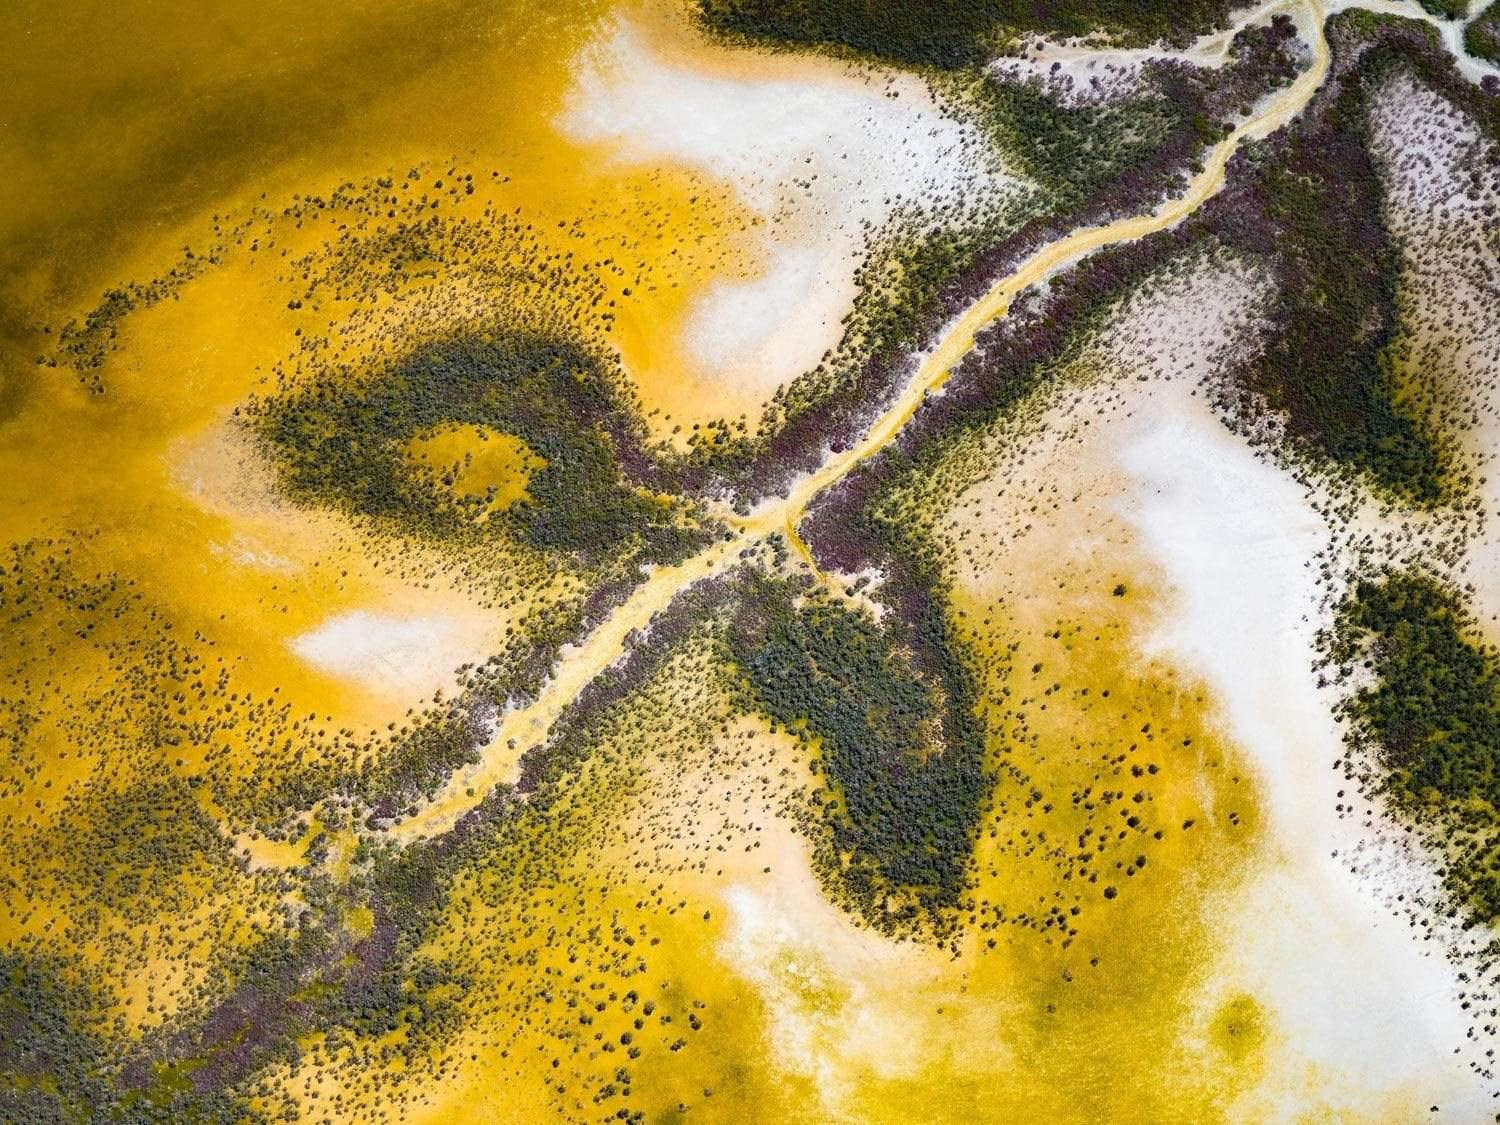 Aerial view of a yellowish land with green leaf-like texture, Taking Flight